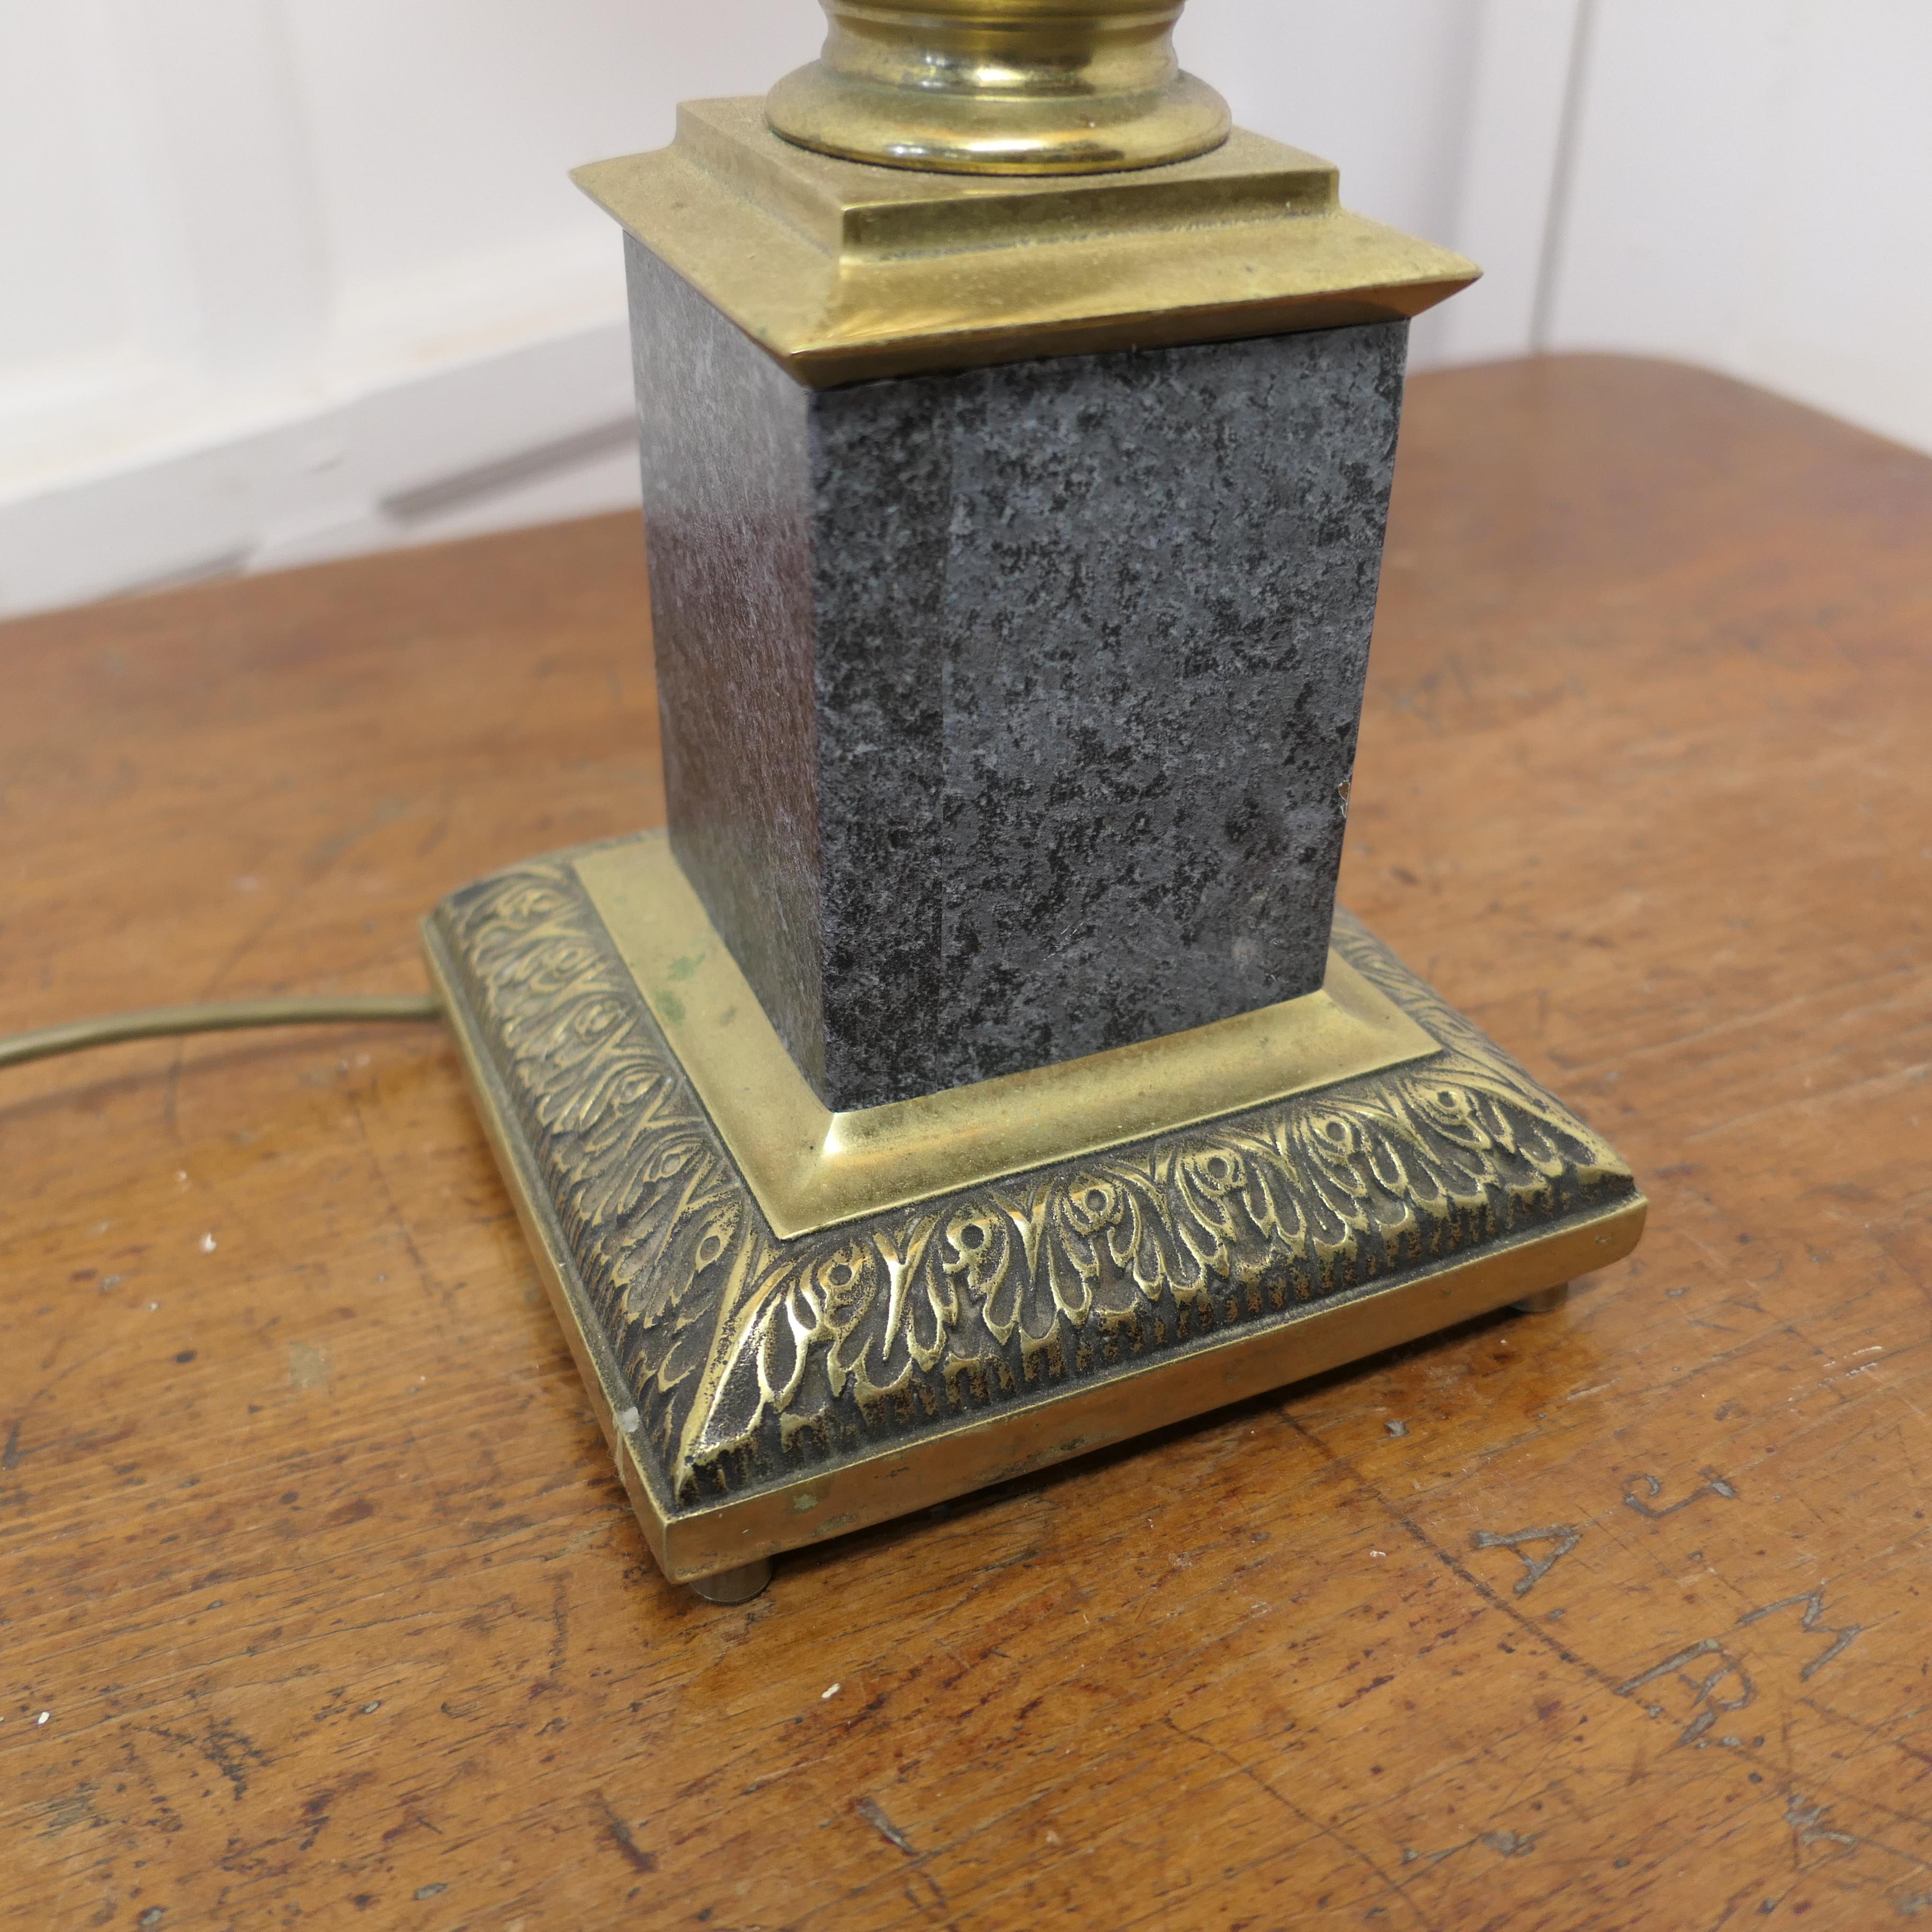 Tall Heavy Granite and Brass Corinthian Column Table Lamp

This is a good heavy piece, the lamp has a single corinthian style column set on a rectangular granite base which is set on a decorative stepped brass square plinth 

This is an attractive